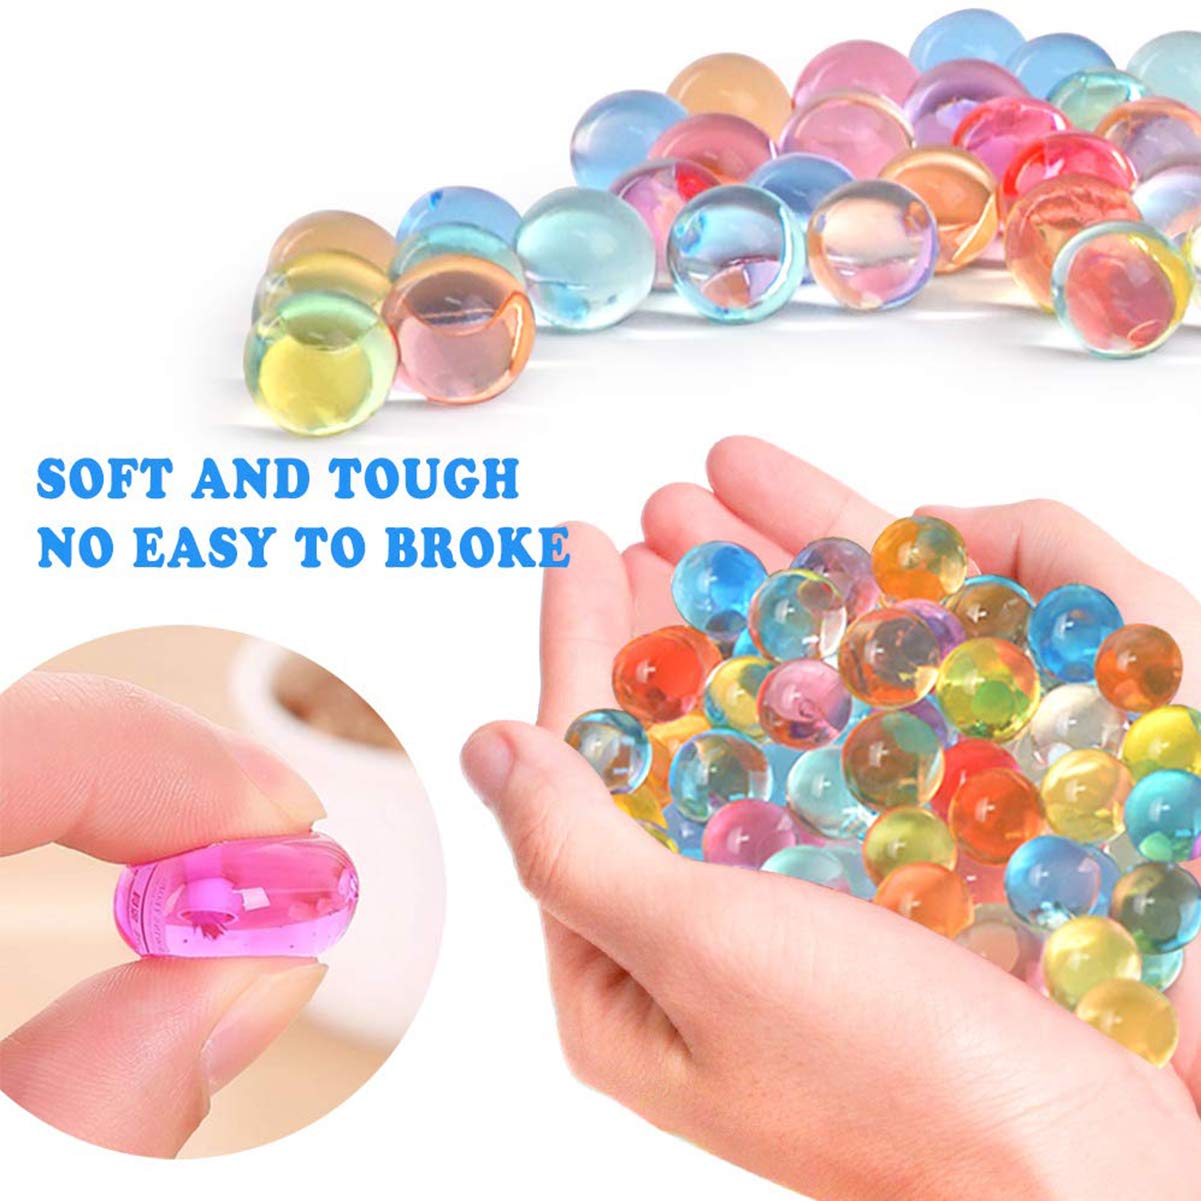 Non Toxic Water Beads Kit 300pcs Giant & 20000 Small Gel Beads for Kids-Value Package Sensory Toys and Decoration